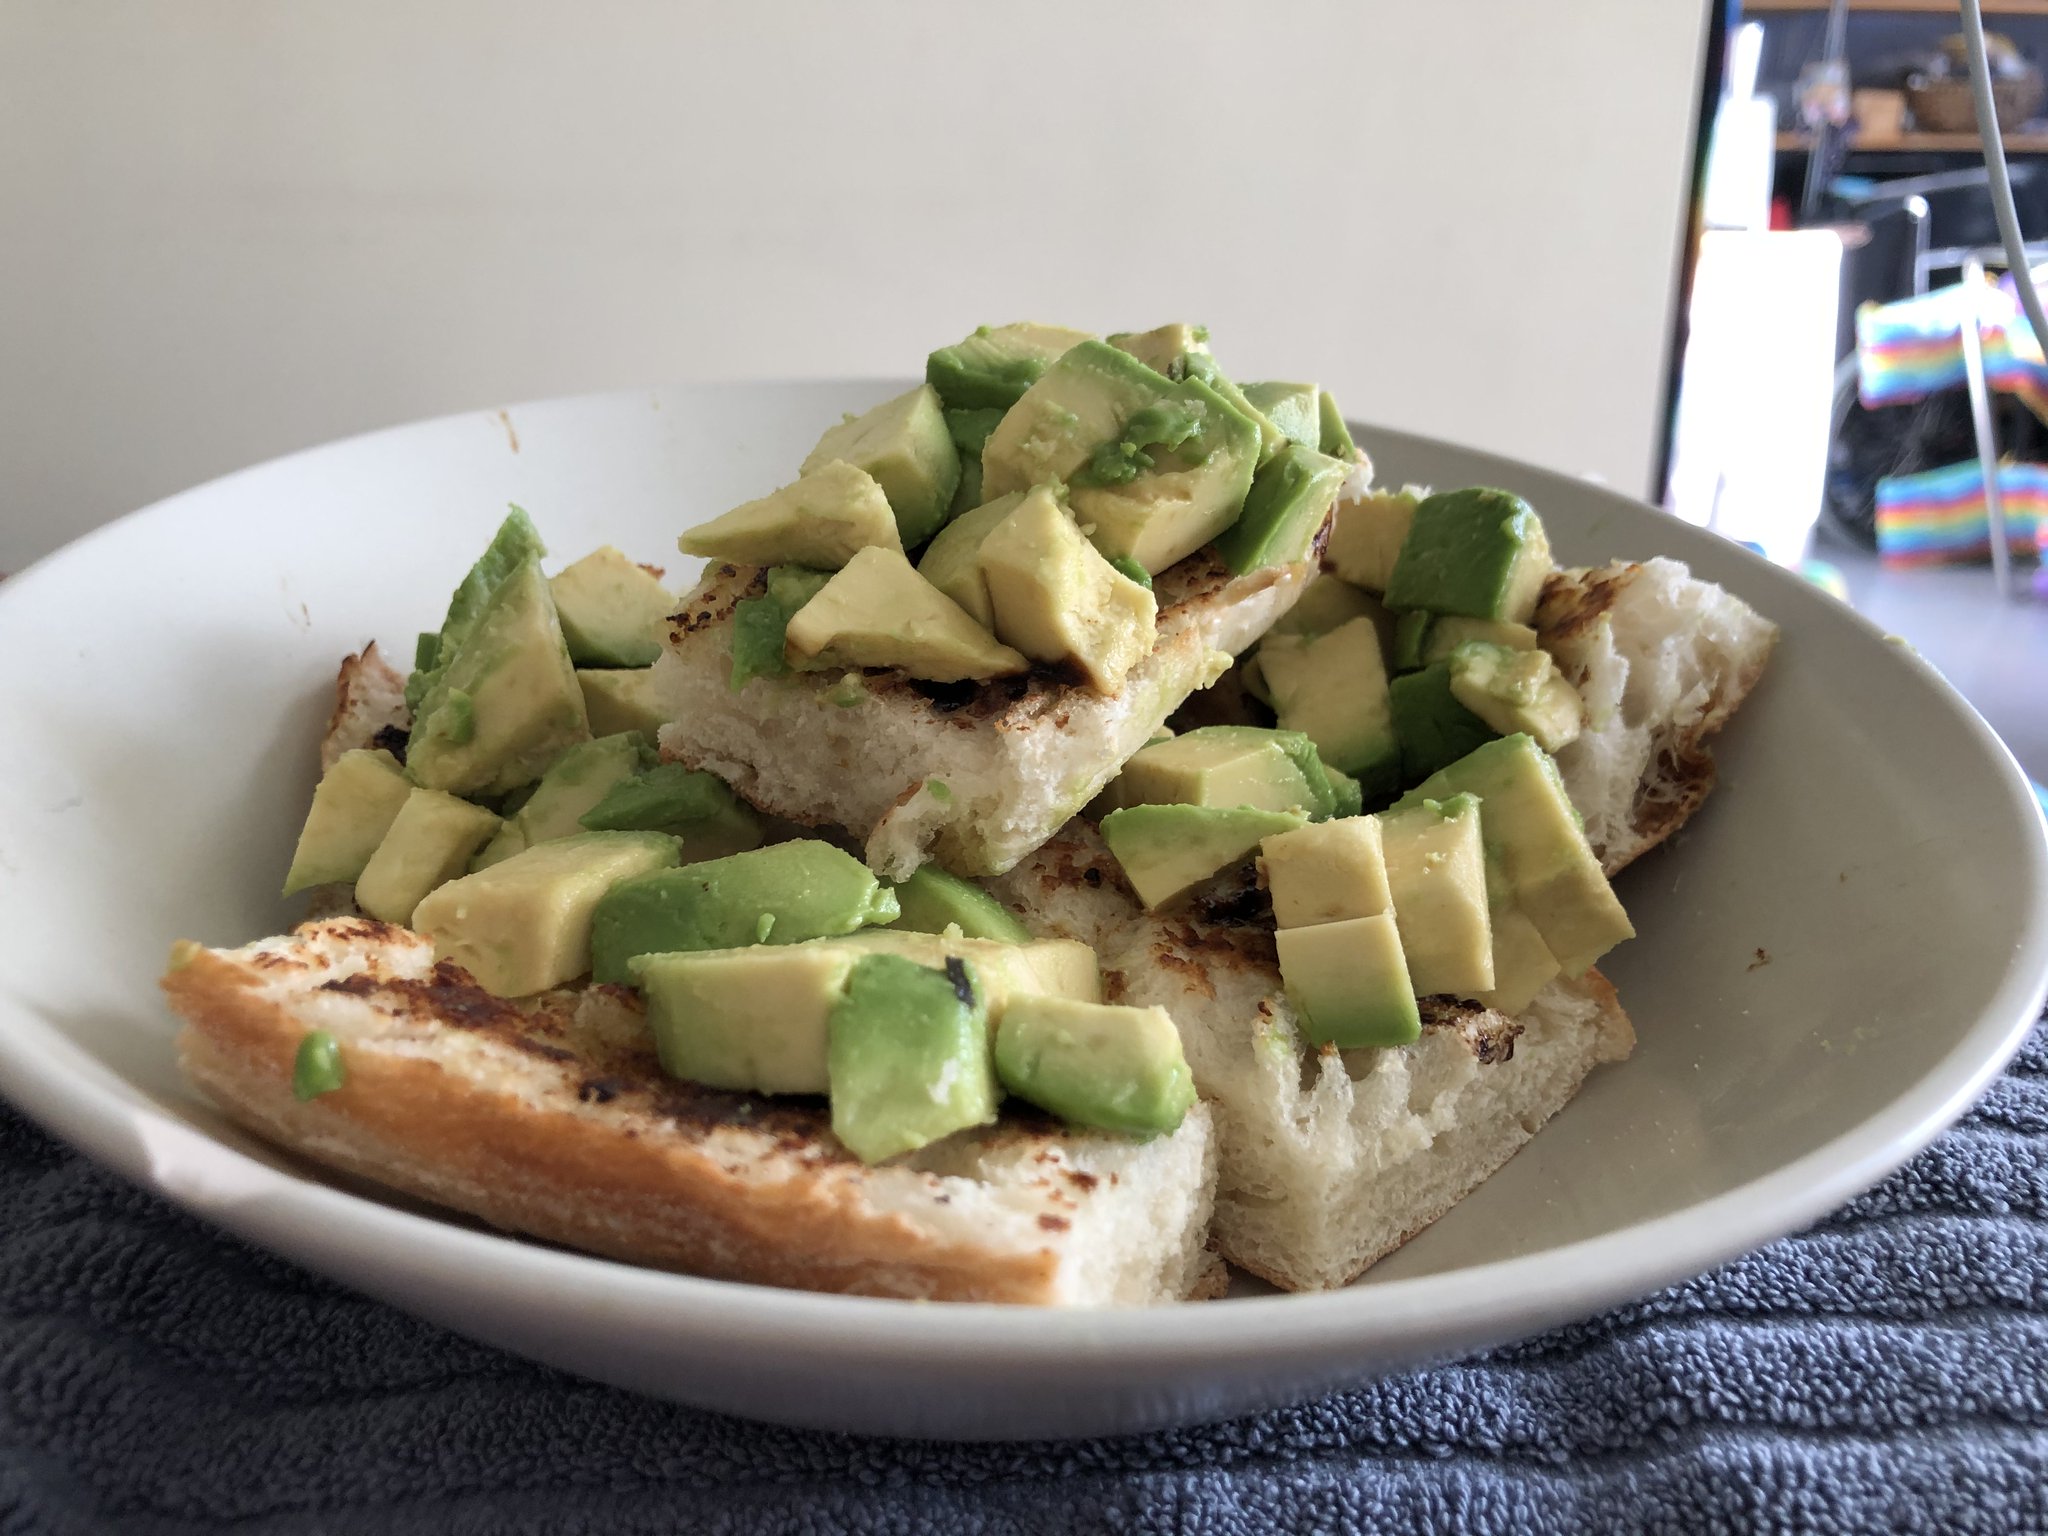 Ricky had avocado on her Vegemite sandwich for breakfast. What a great idea!